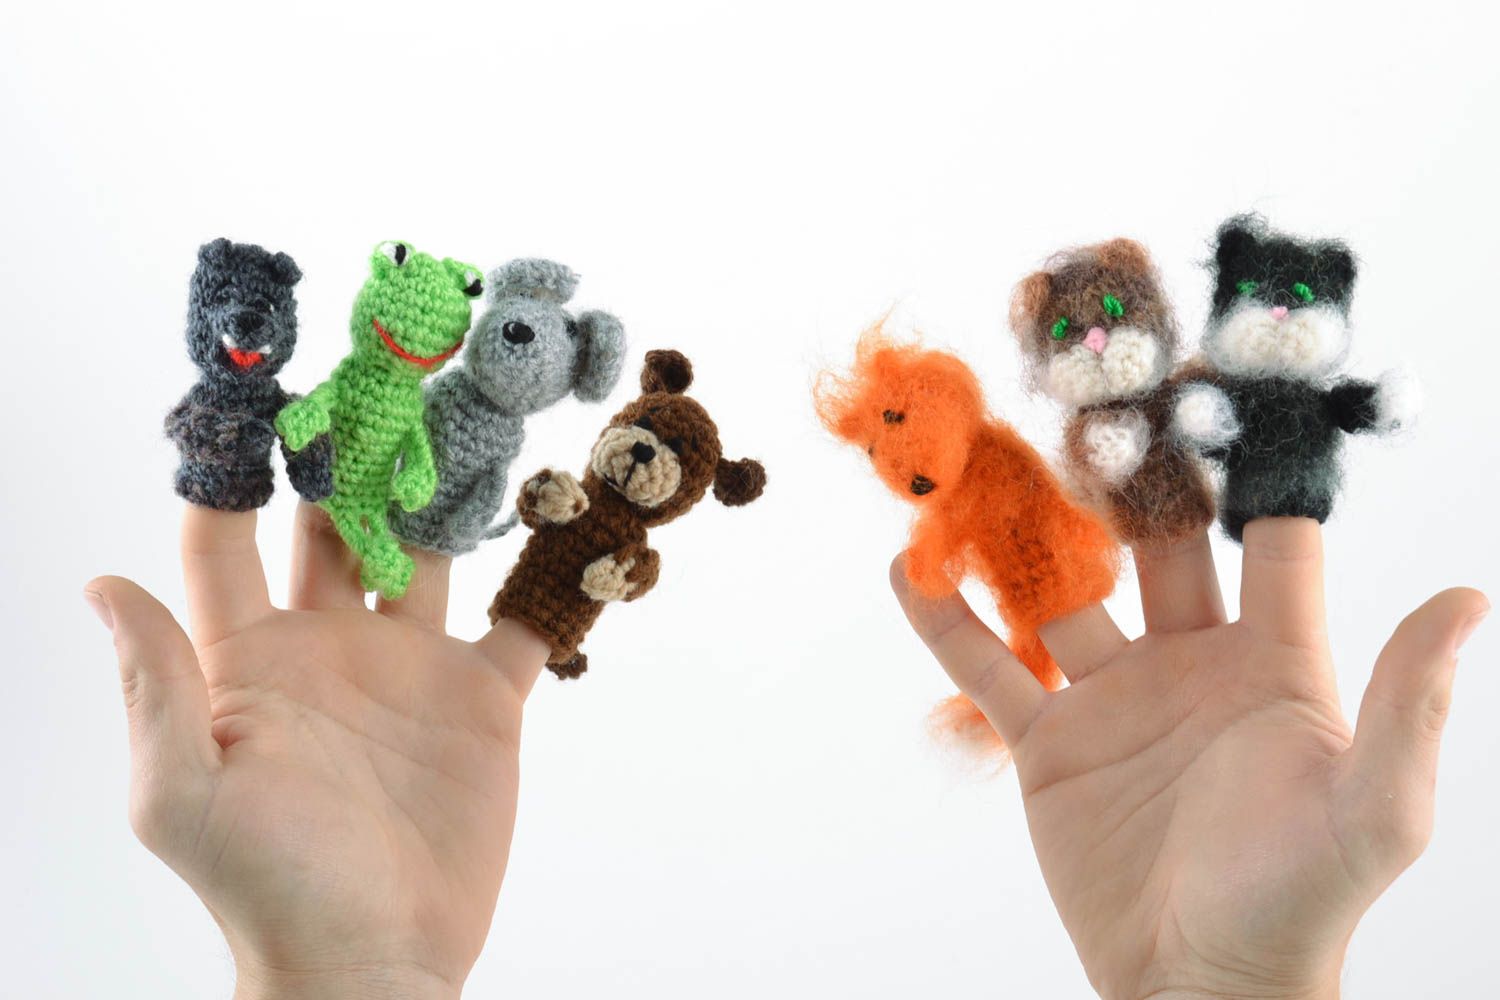 Handmade beautiful finger puppet theatre 7 crocheted toys for children to play photo 4